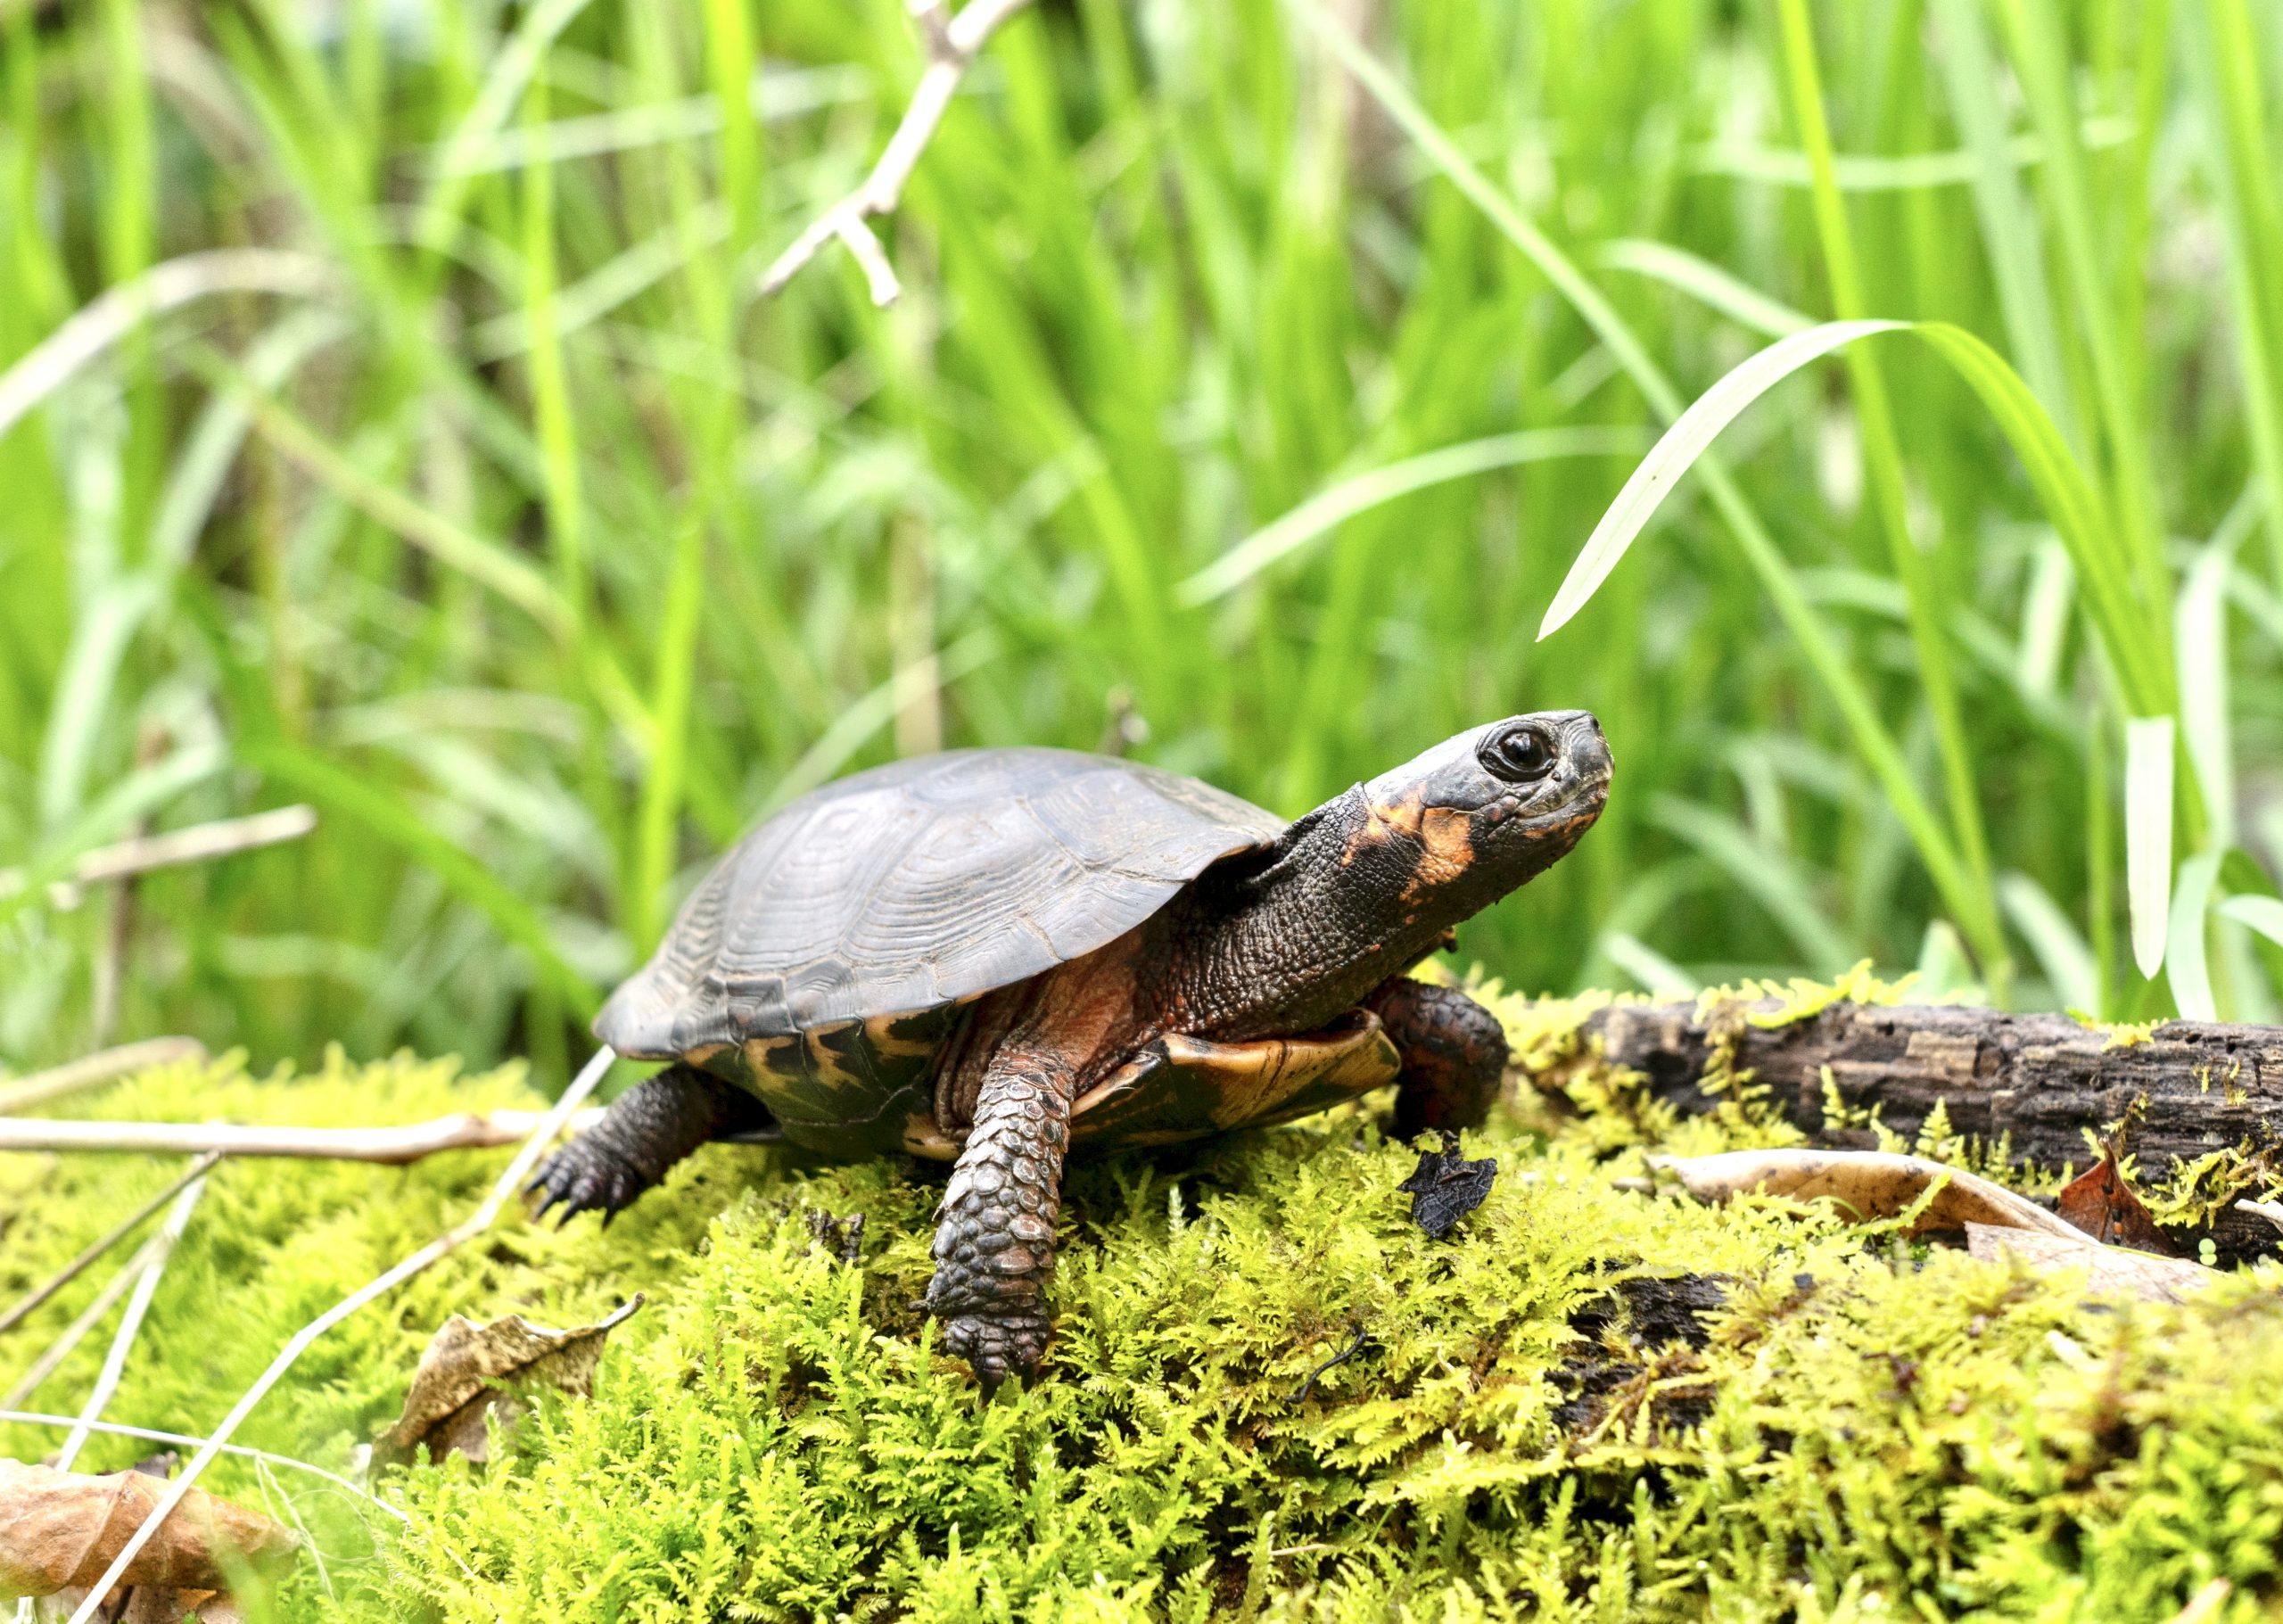 A small, slate-colored turtle with an orange spot on the side of its head stands atop a mound of moss.